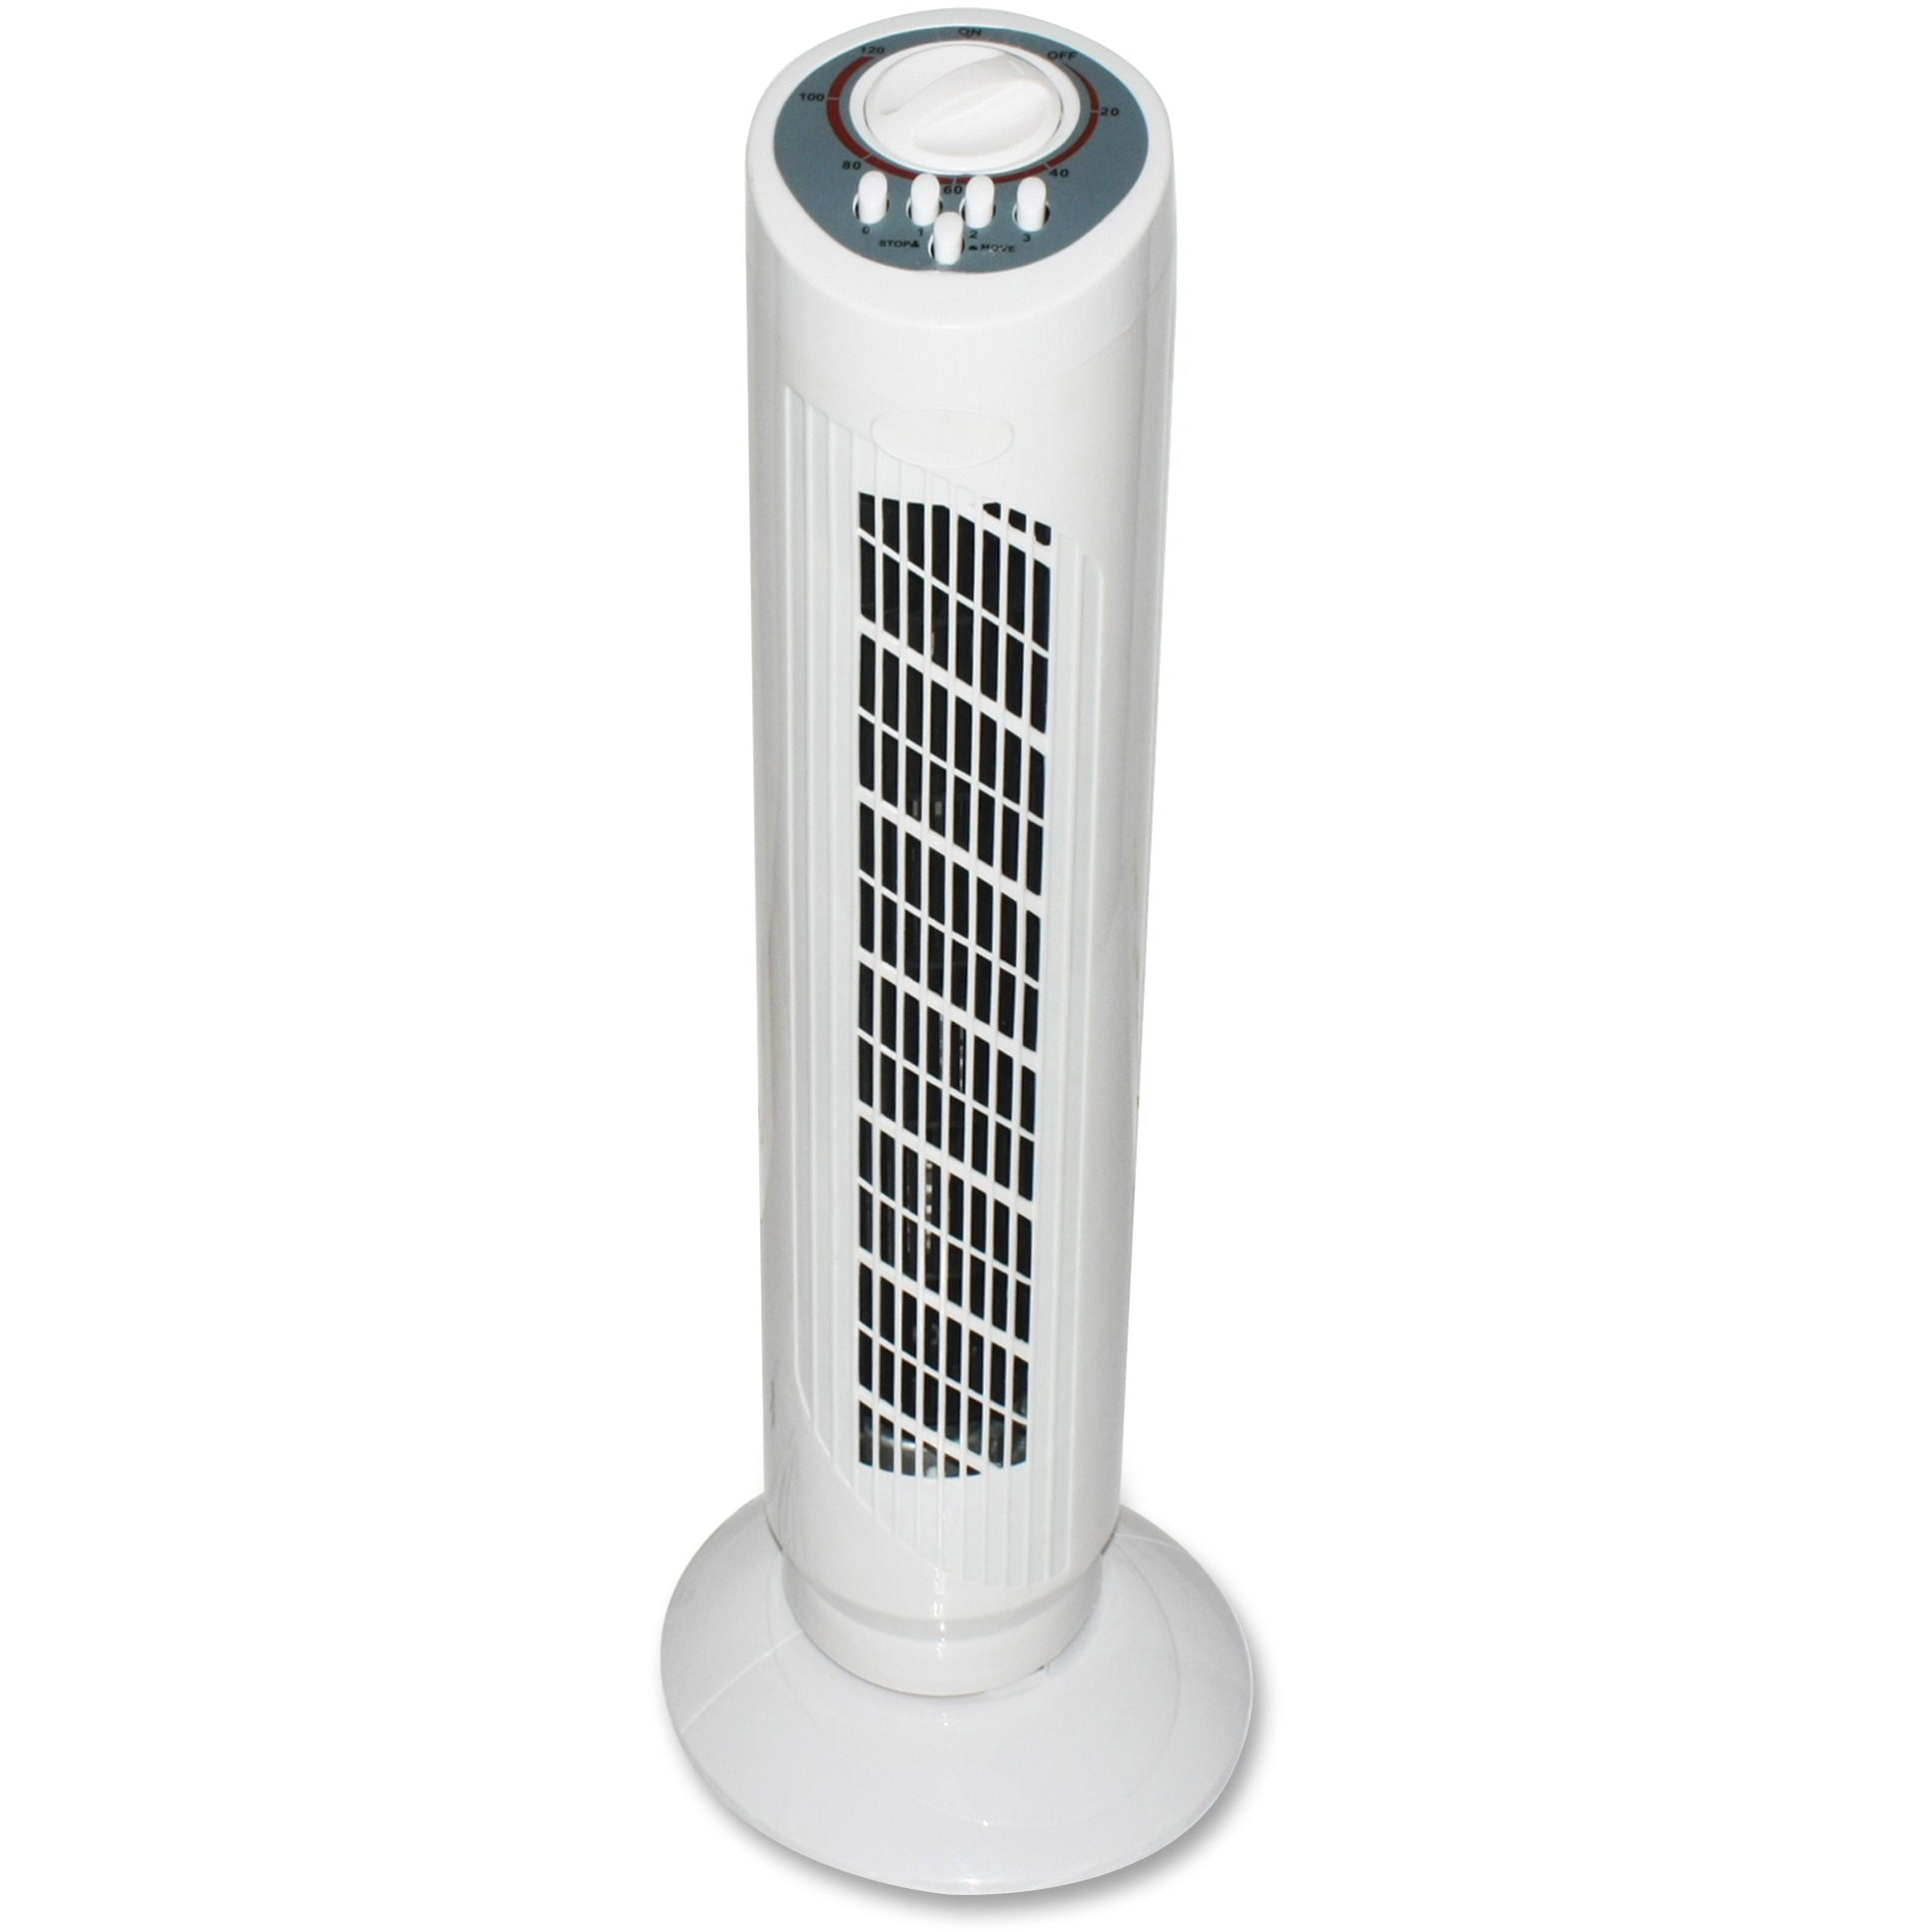 Royal Sovereign Tfn 508 30 Tower Fan 30 Diameter 3 Speed Oscillating Space Saving Quiet Carrying Handle Timer Off Function 231 Height intended for dimensions 1934 X 1934